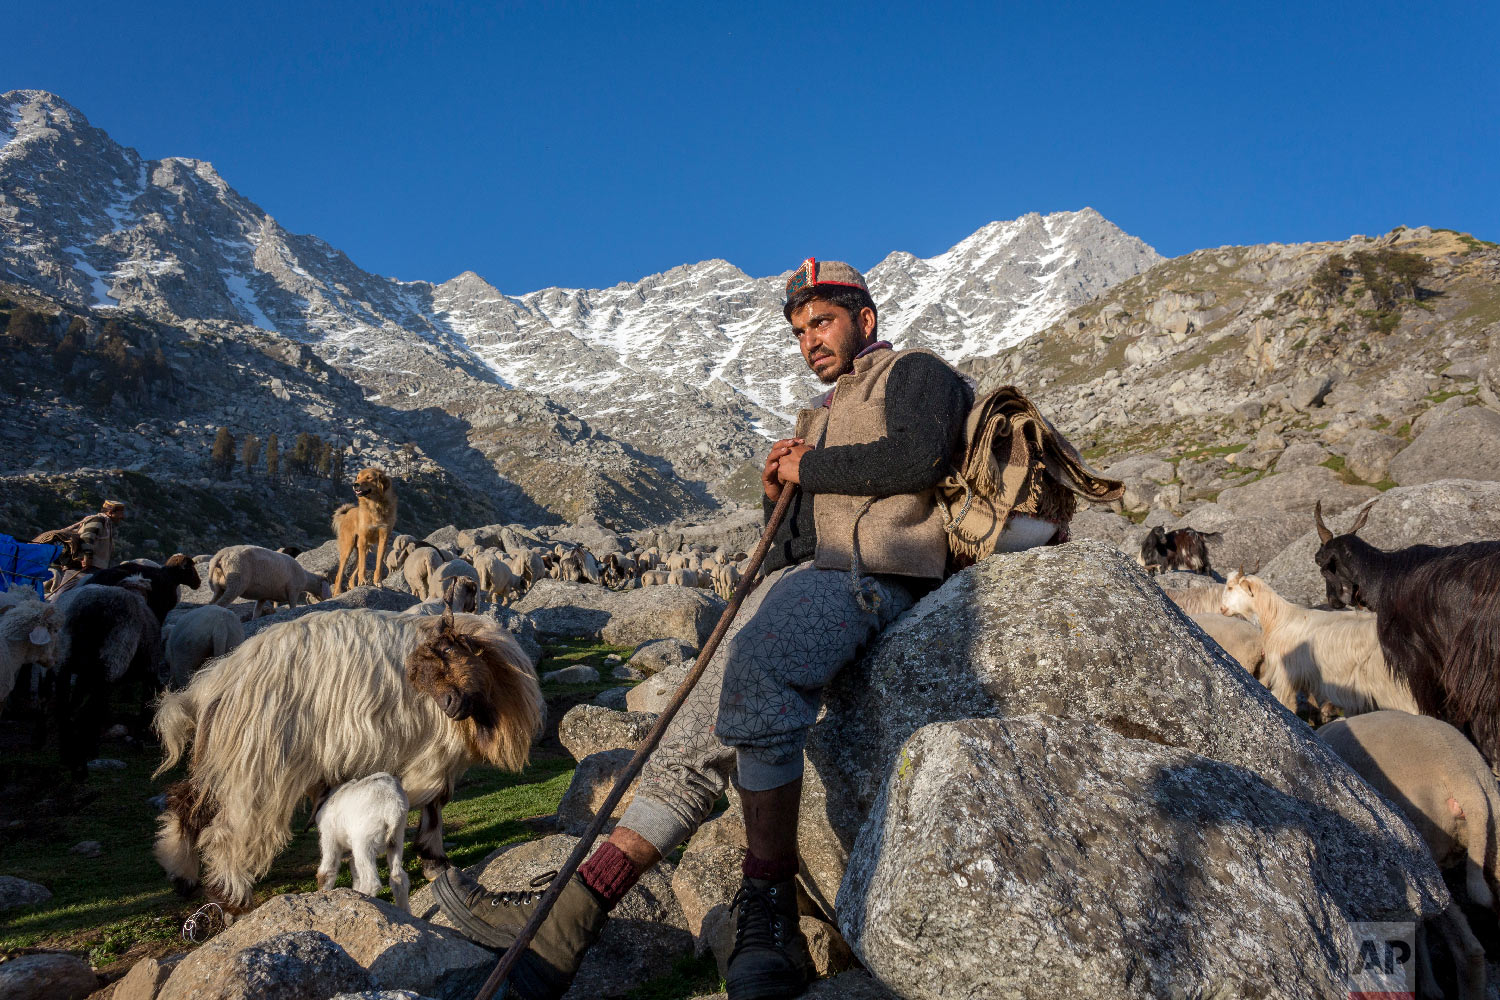  A local gaddi shepherd sits with a flock of goats and sheep before climbing a steep mountain pass in search of better grazing ground in Dharmsala, India, Friday, May 11, 2018. This local way of life is slowly disappearing as the younger generation o